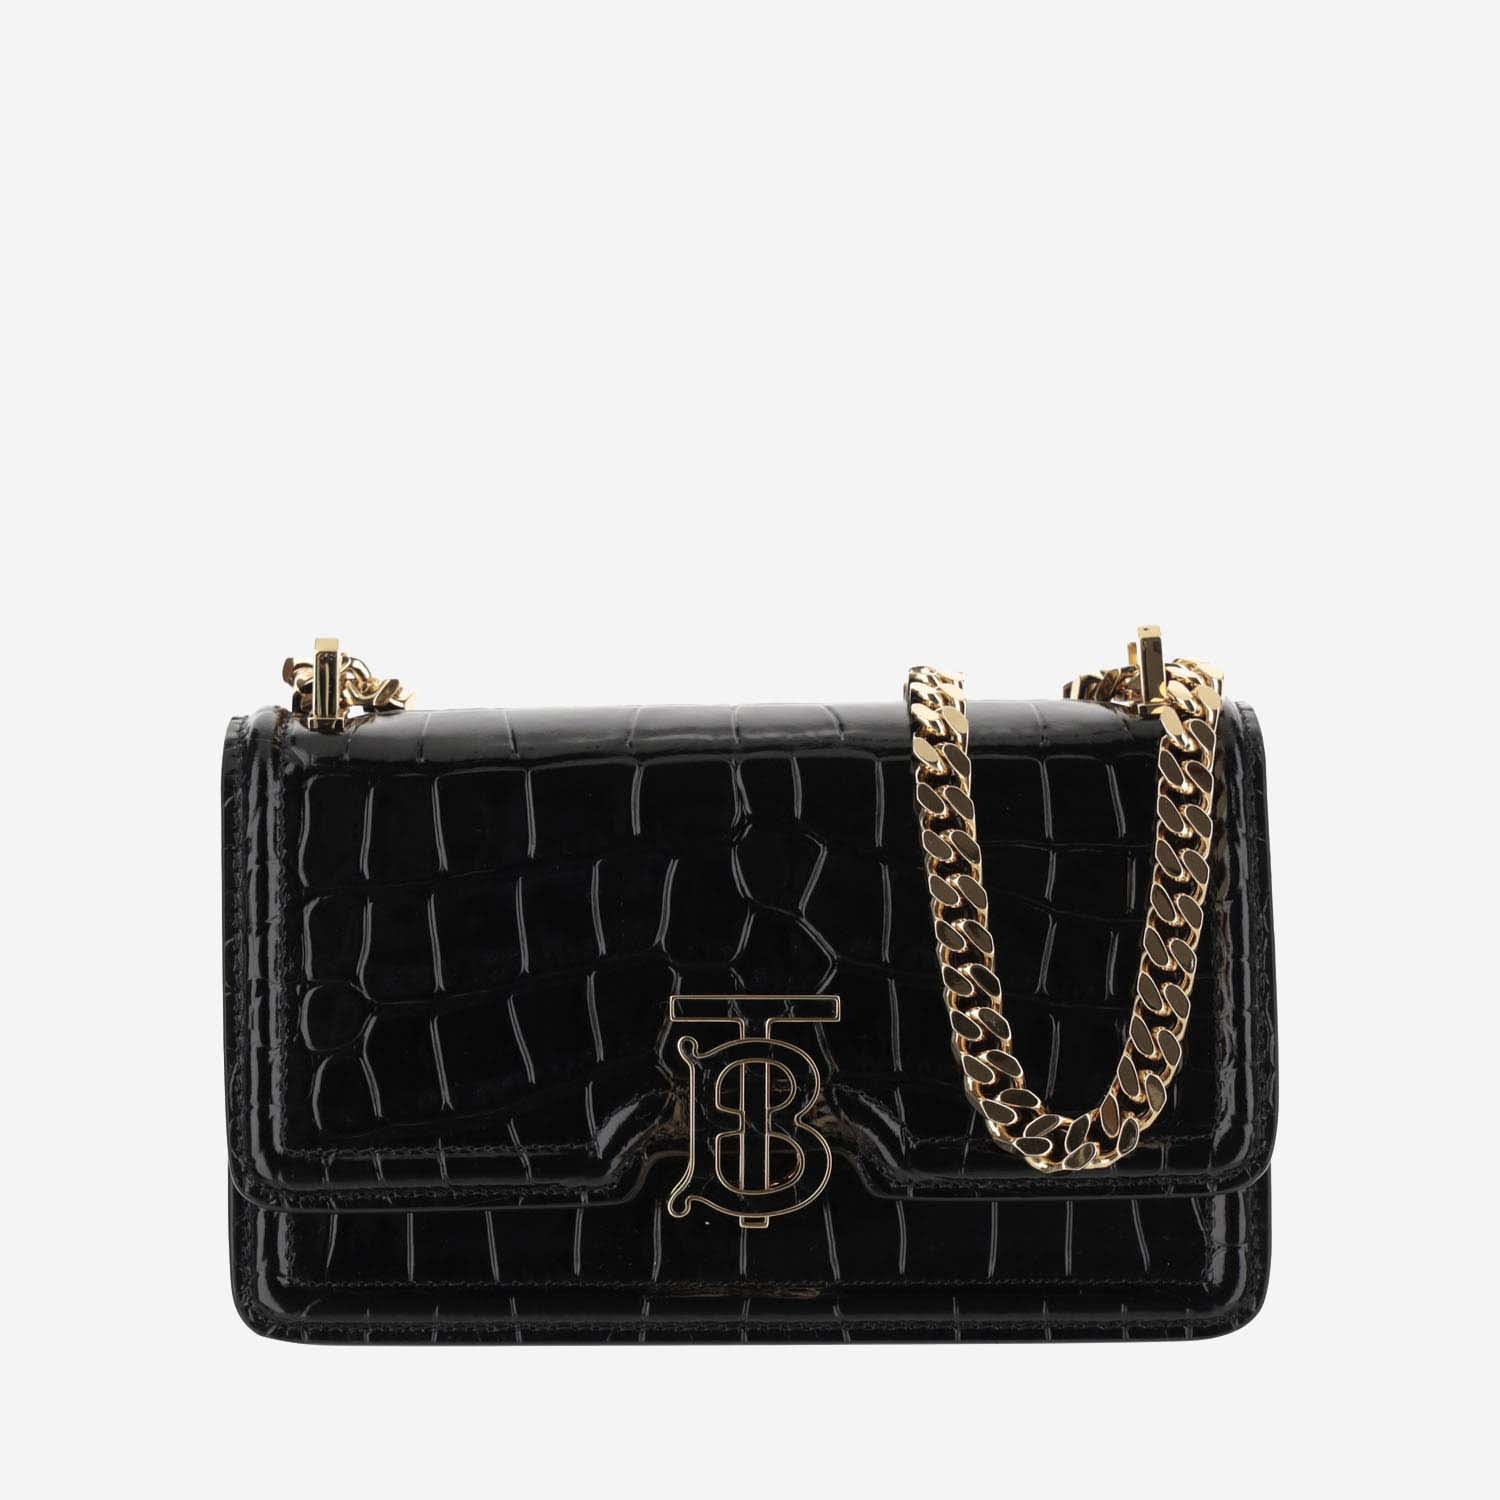 Burberry Tb Mini Embossed Leather Bag With Chain Strap In Black